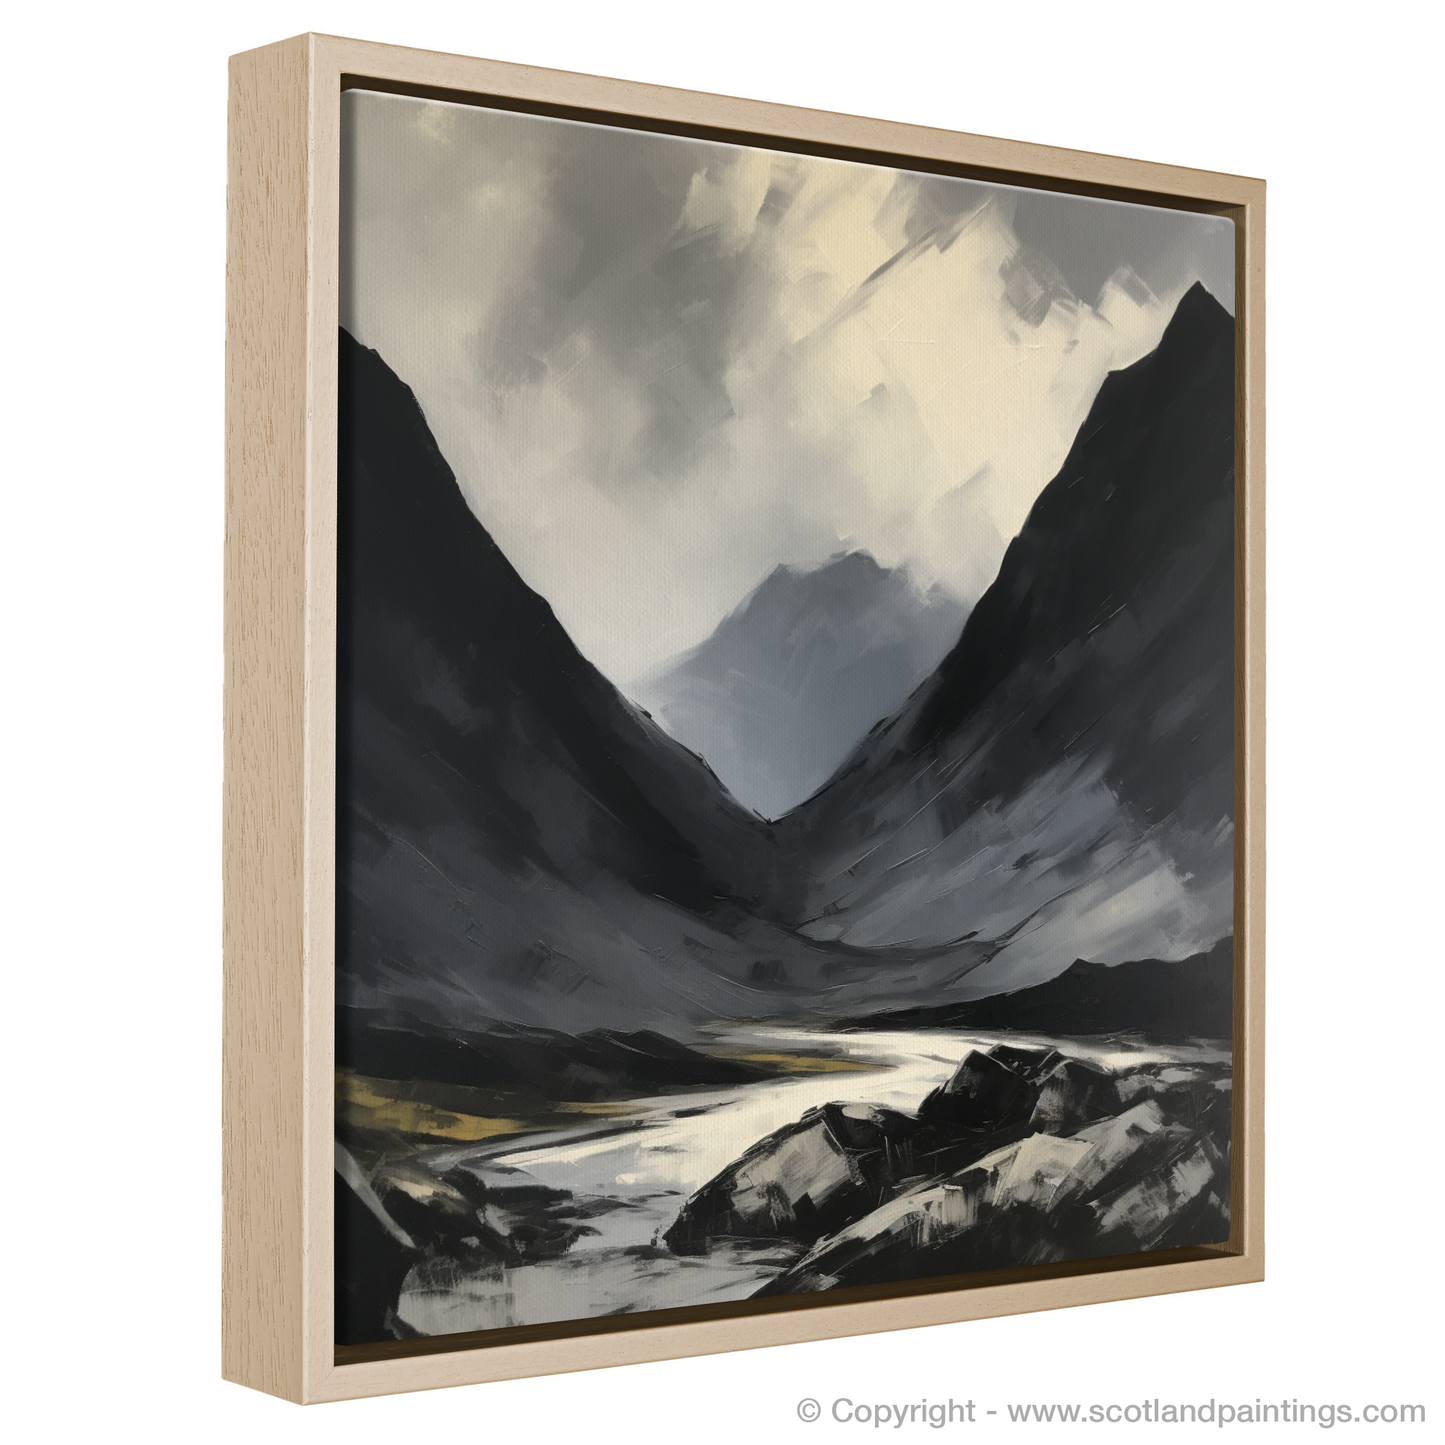 Painting and Art Print of Silhouetted peaks in Glencoe entitled "Silhouetted Peaks of Glencoe: An Expressionist Tribute".